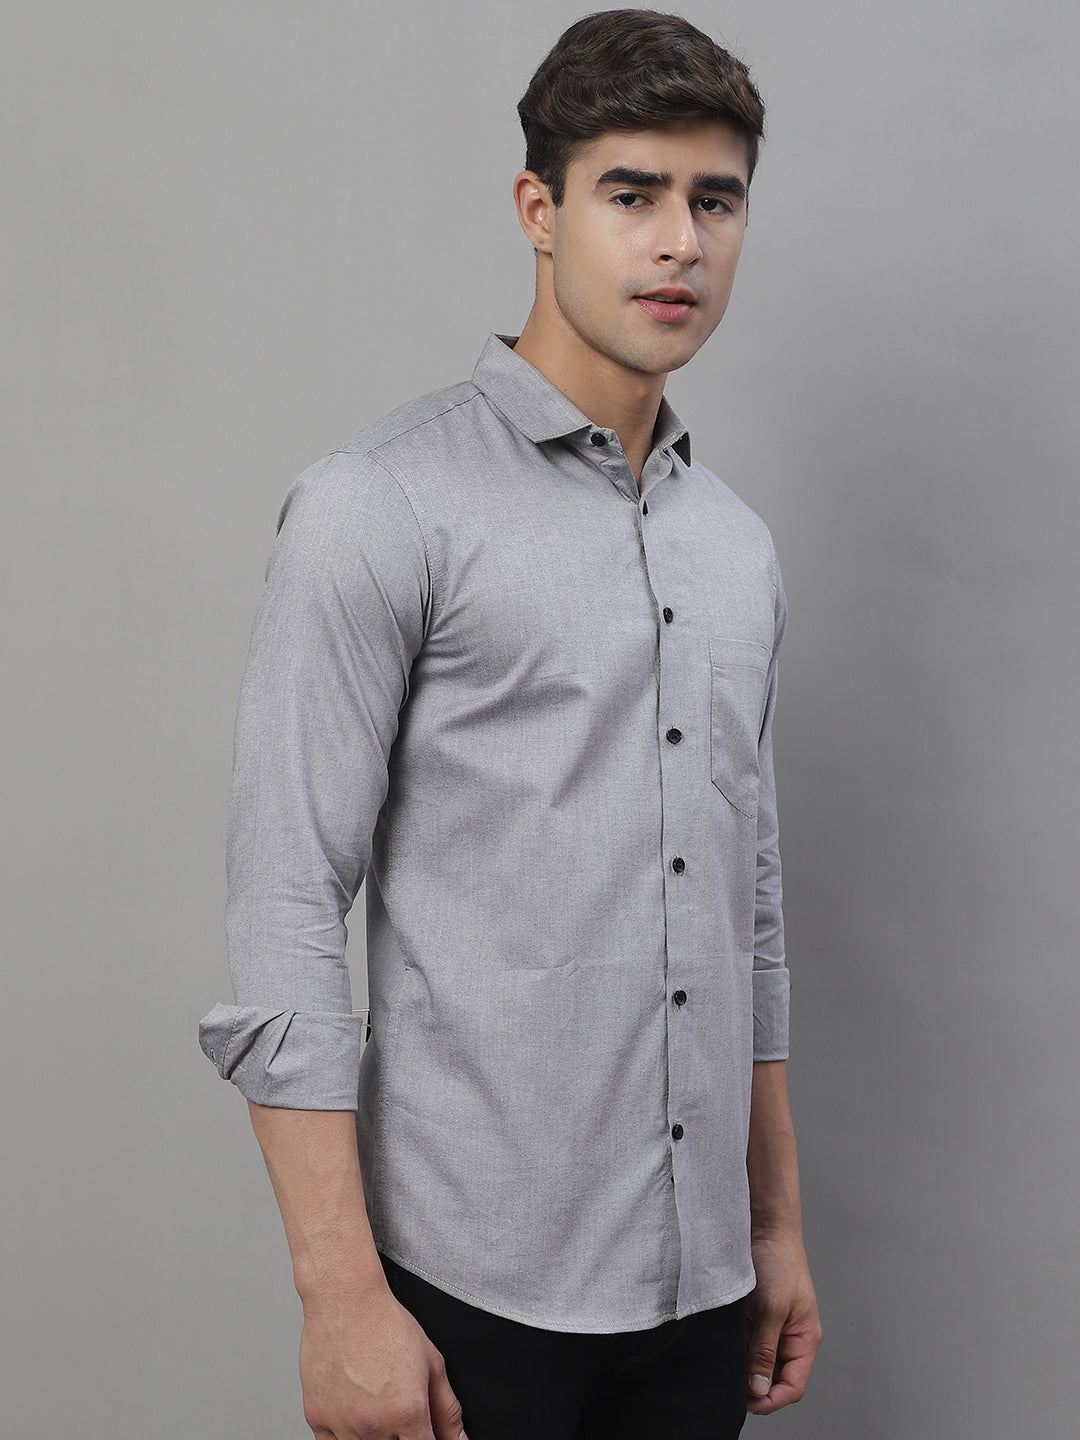 Unique and Classy Casual Shirt - Grey